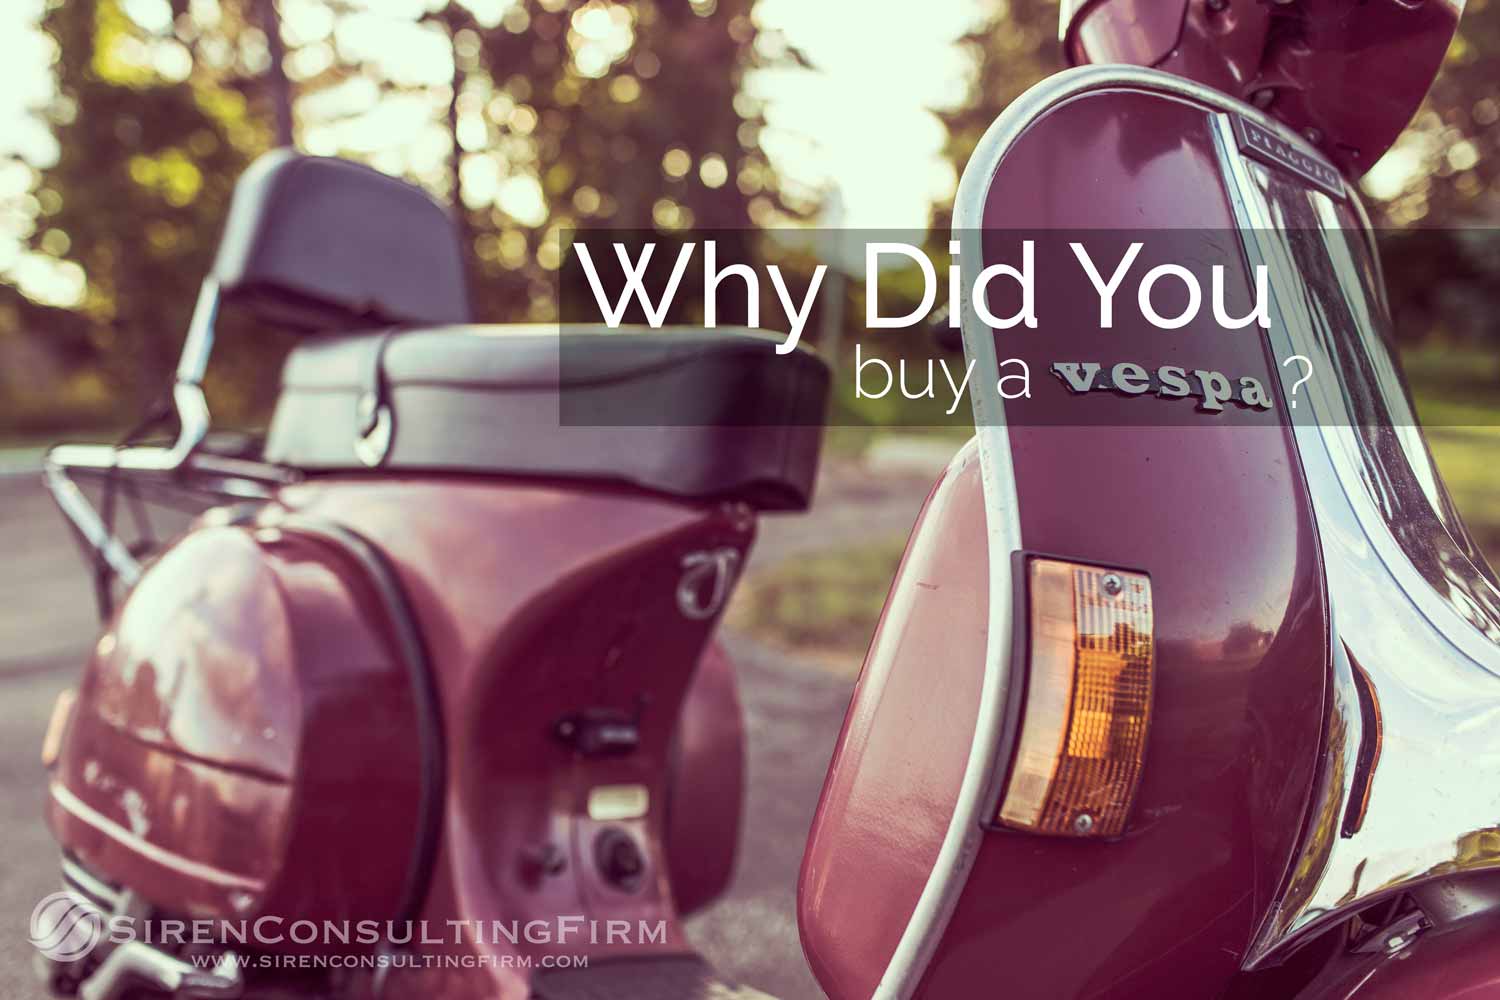 Why Did You Buy A Vespa?